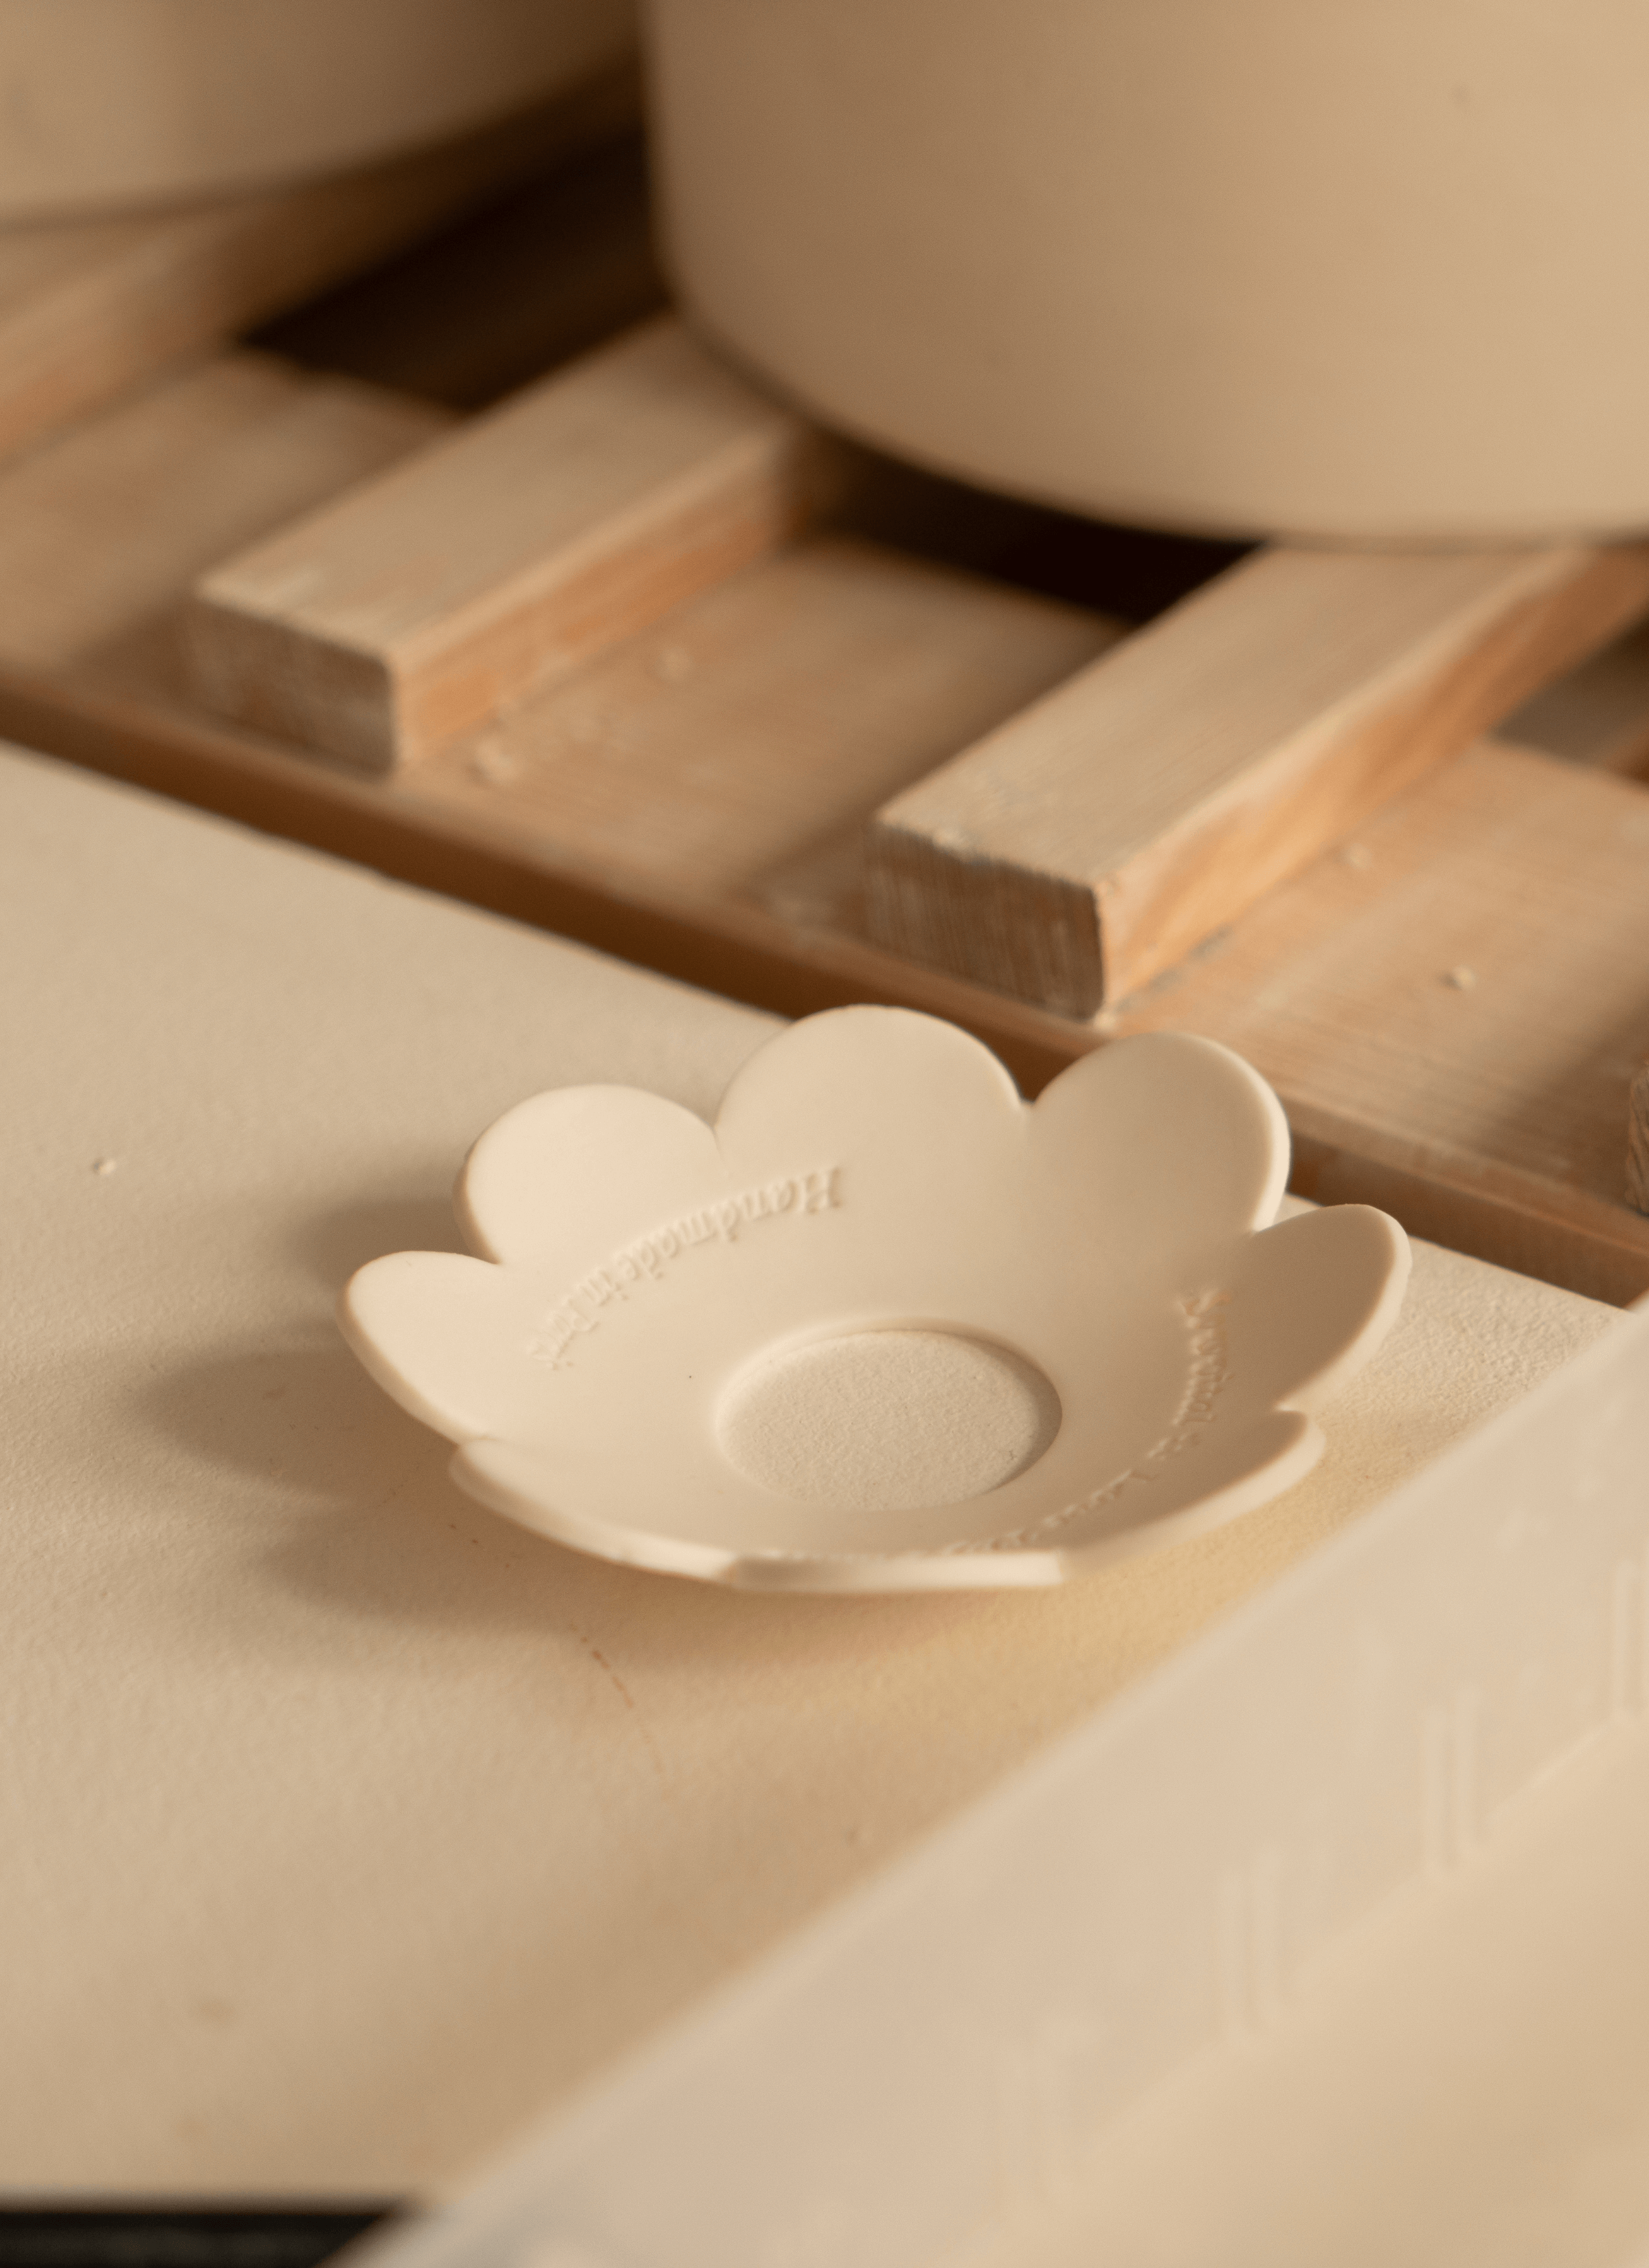 A ceramic germination disc rests on a surface, its smooth texture and earthy tones highlighting its craftsmanship. Nearby, wooden crates hold an assortment of ceramic pots, their shapes and sizes varying.